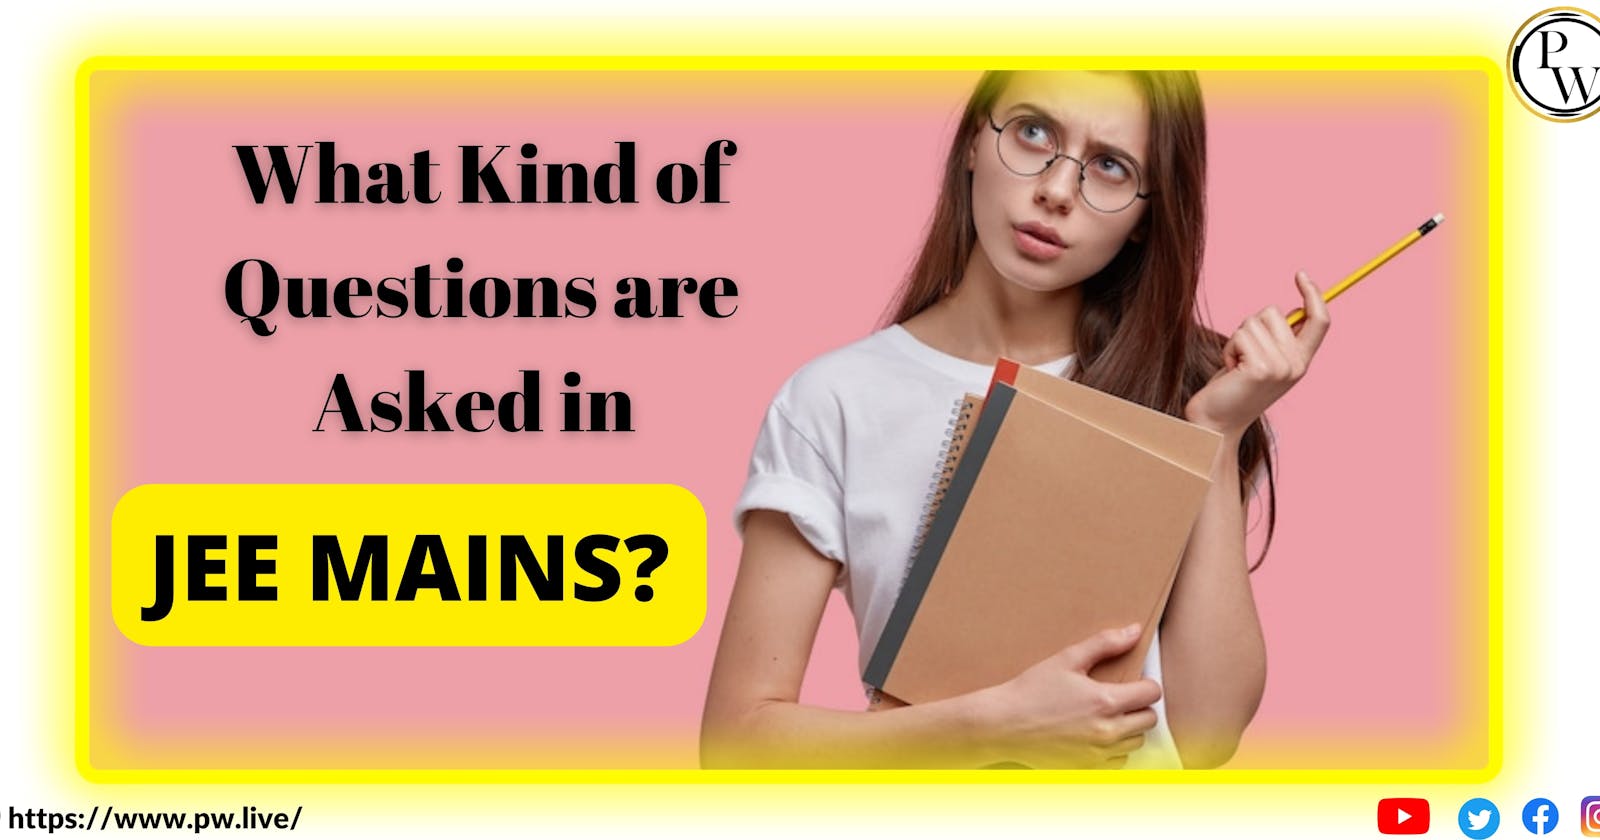 What kind of Questions are Asked in JEE mains?